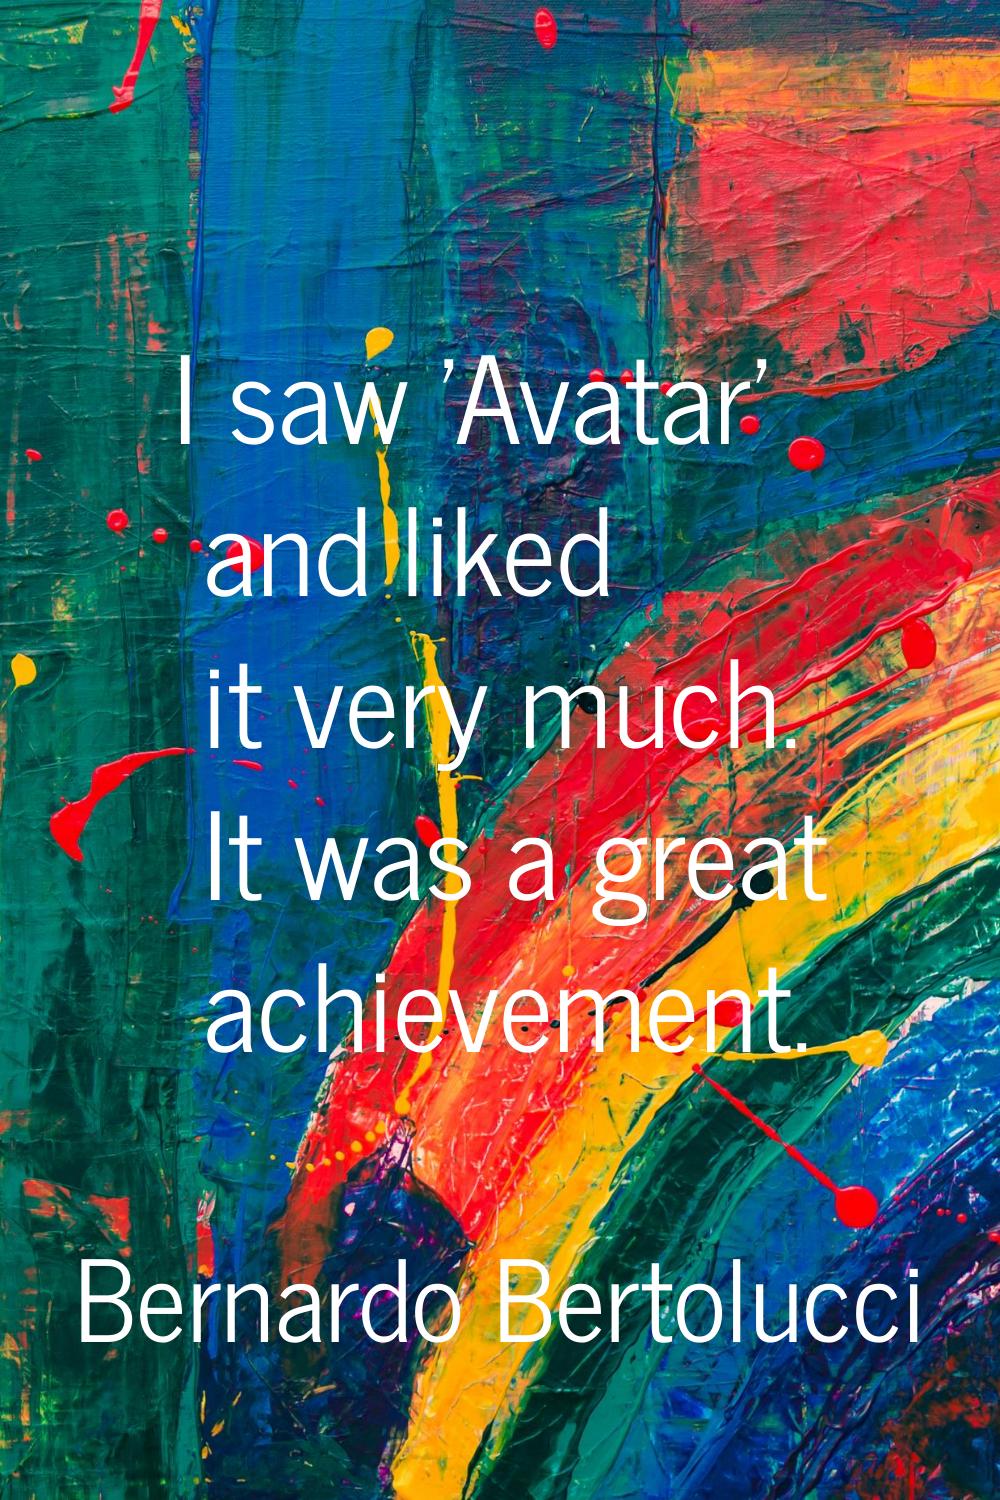 I saw 'Avatar' and liked it very much. It was a great achievement.